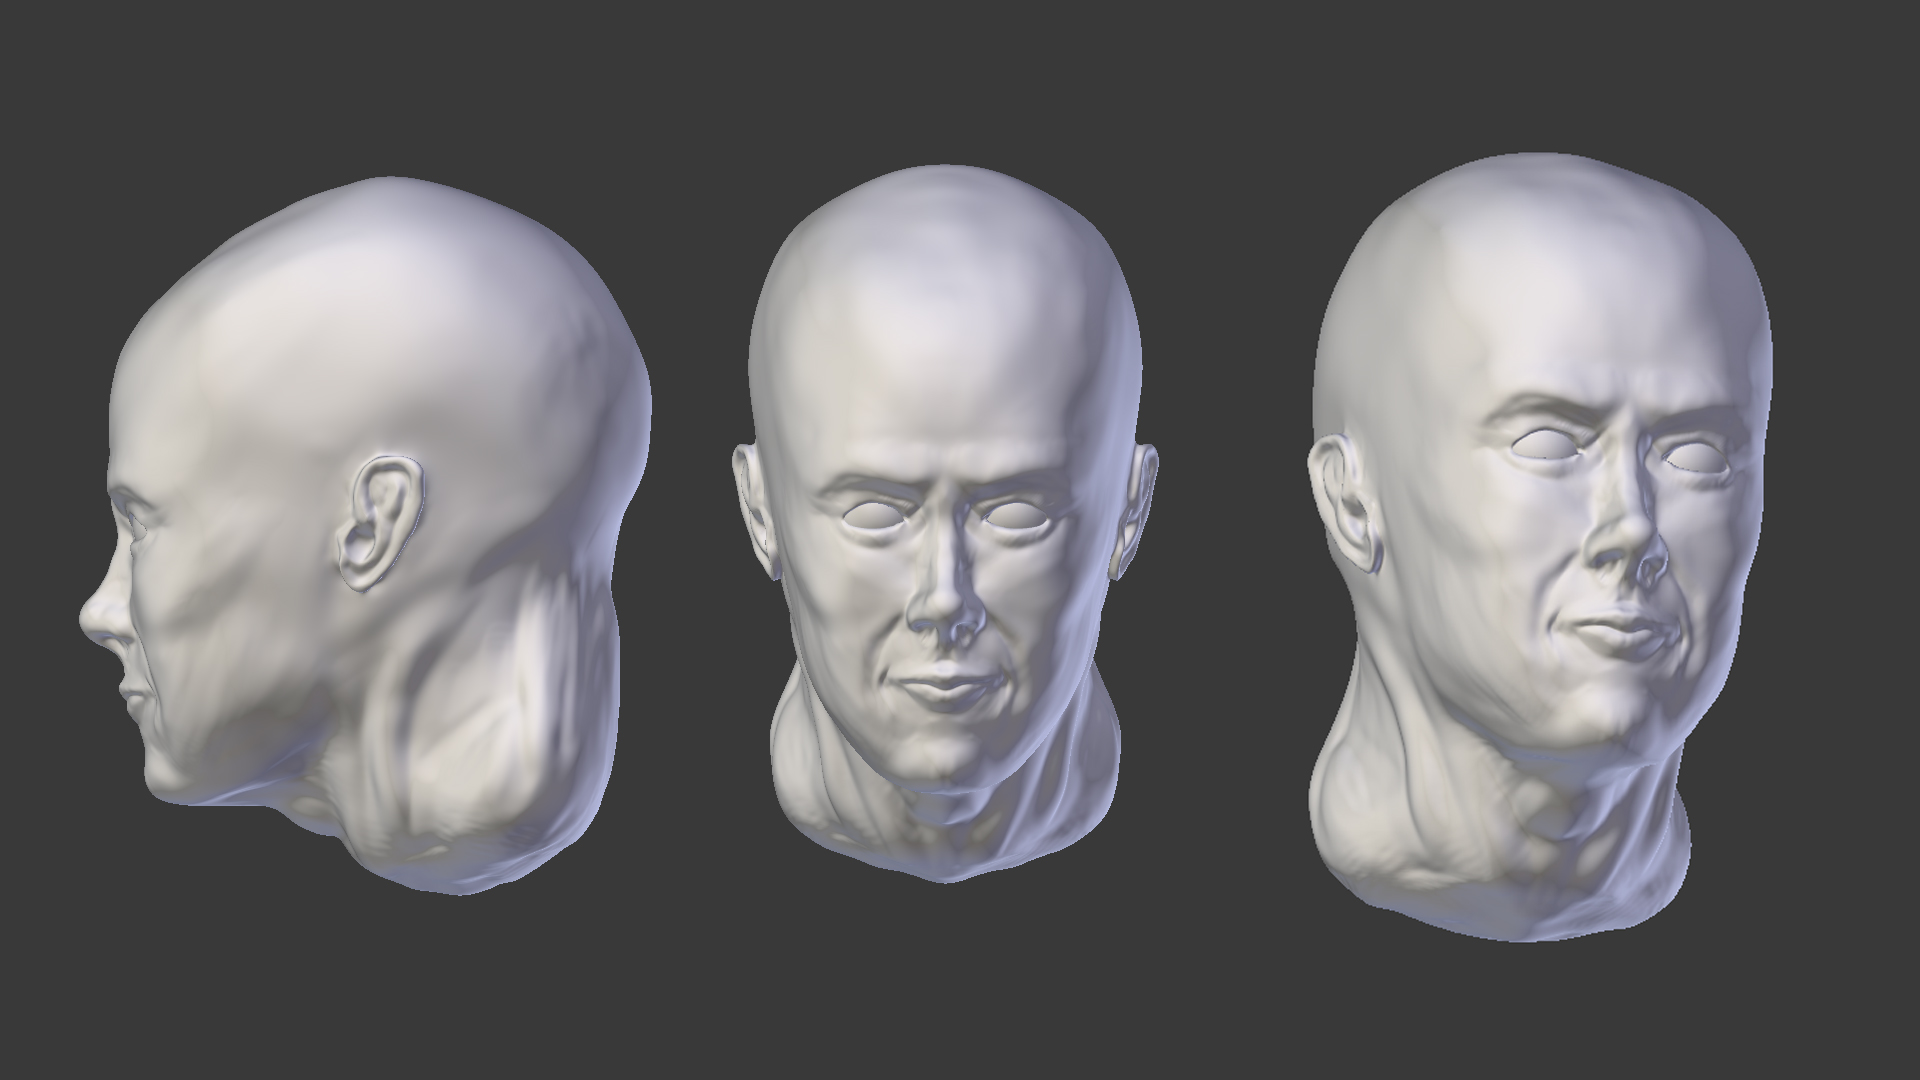 Human Head Sculpt made with Blender by KauheeApina on DeviantArt